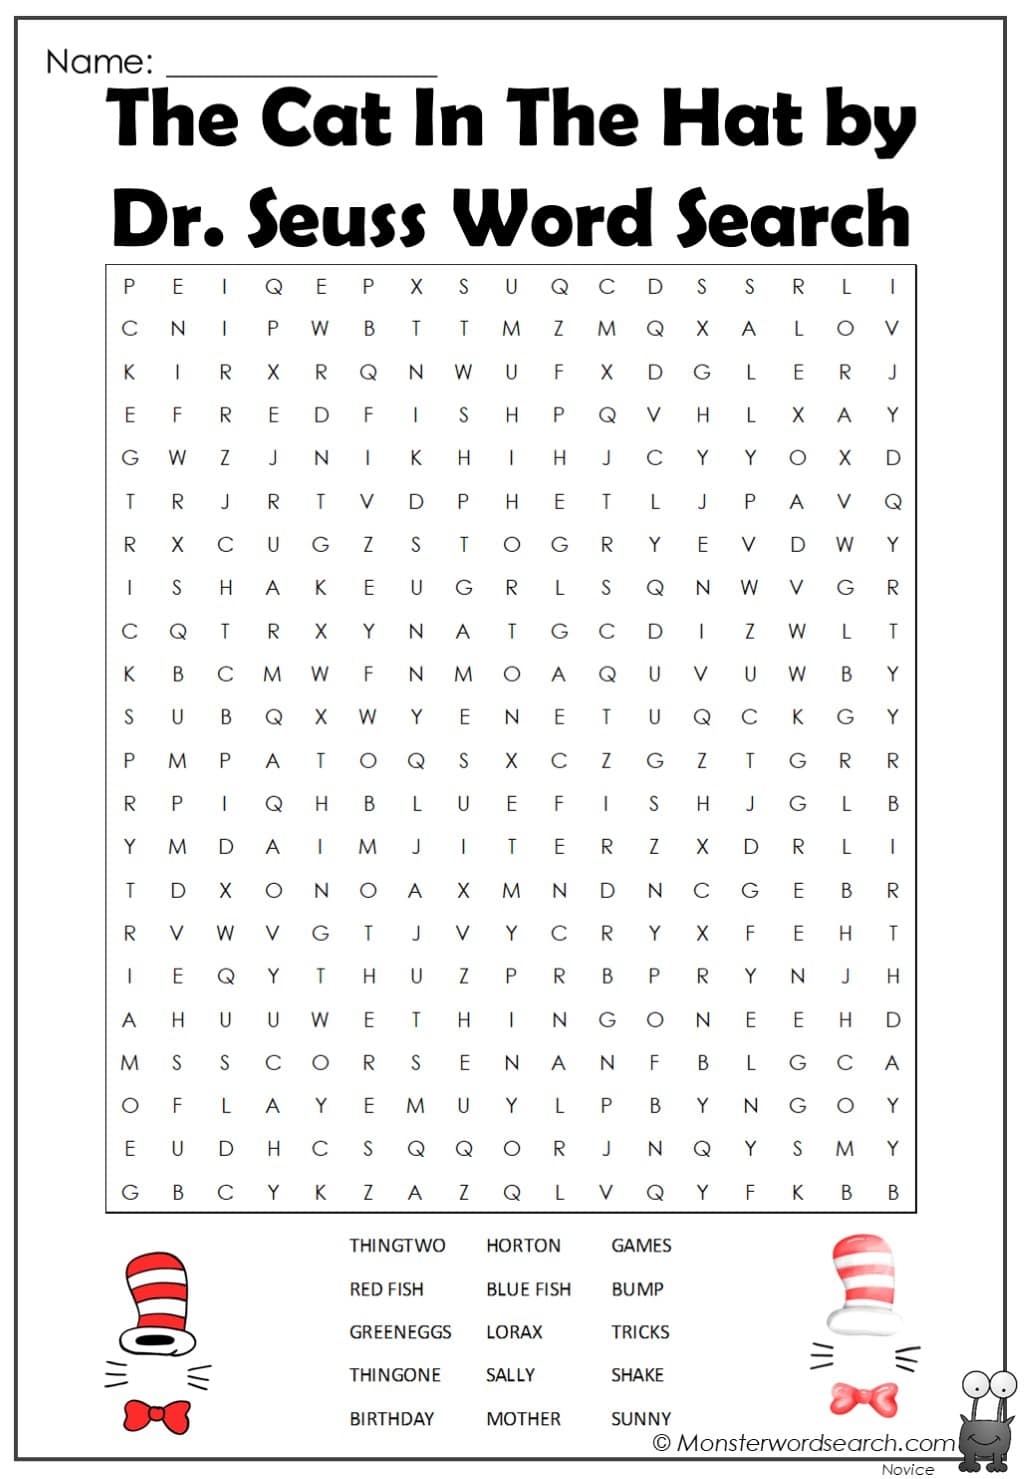 the-cat-in-the-hat-by-dr-seuss-word-search-monster-word-search-word